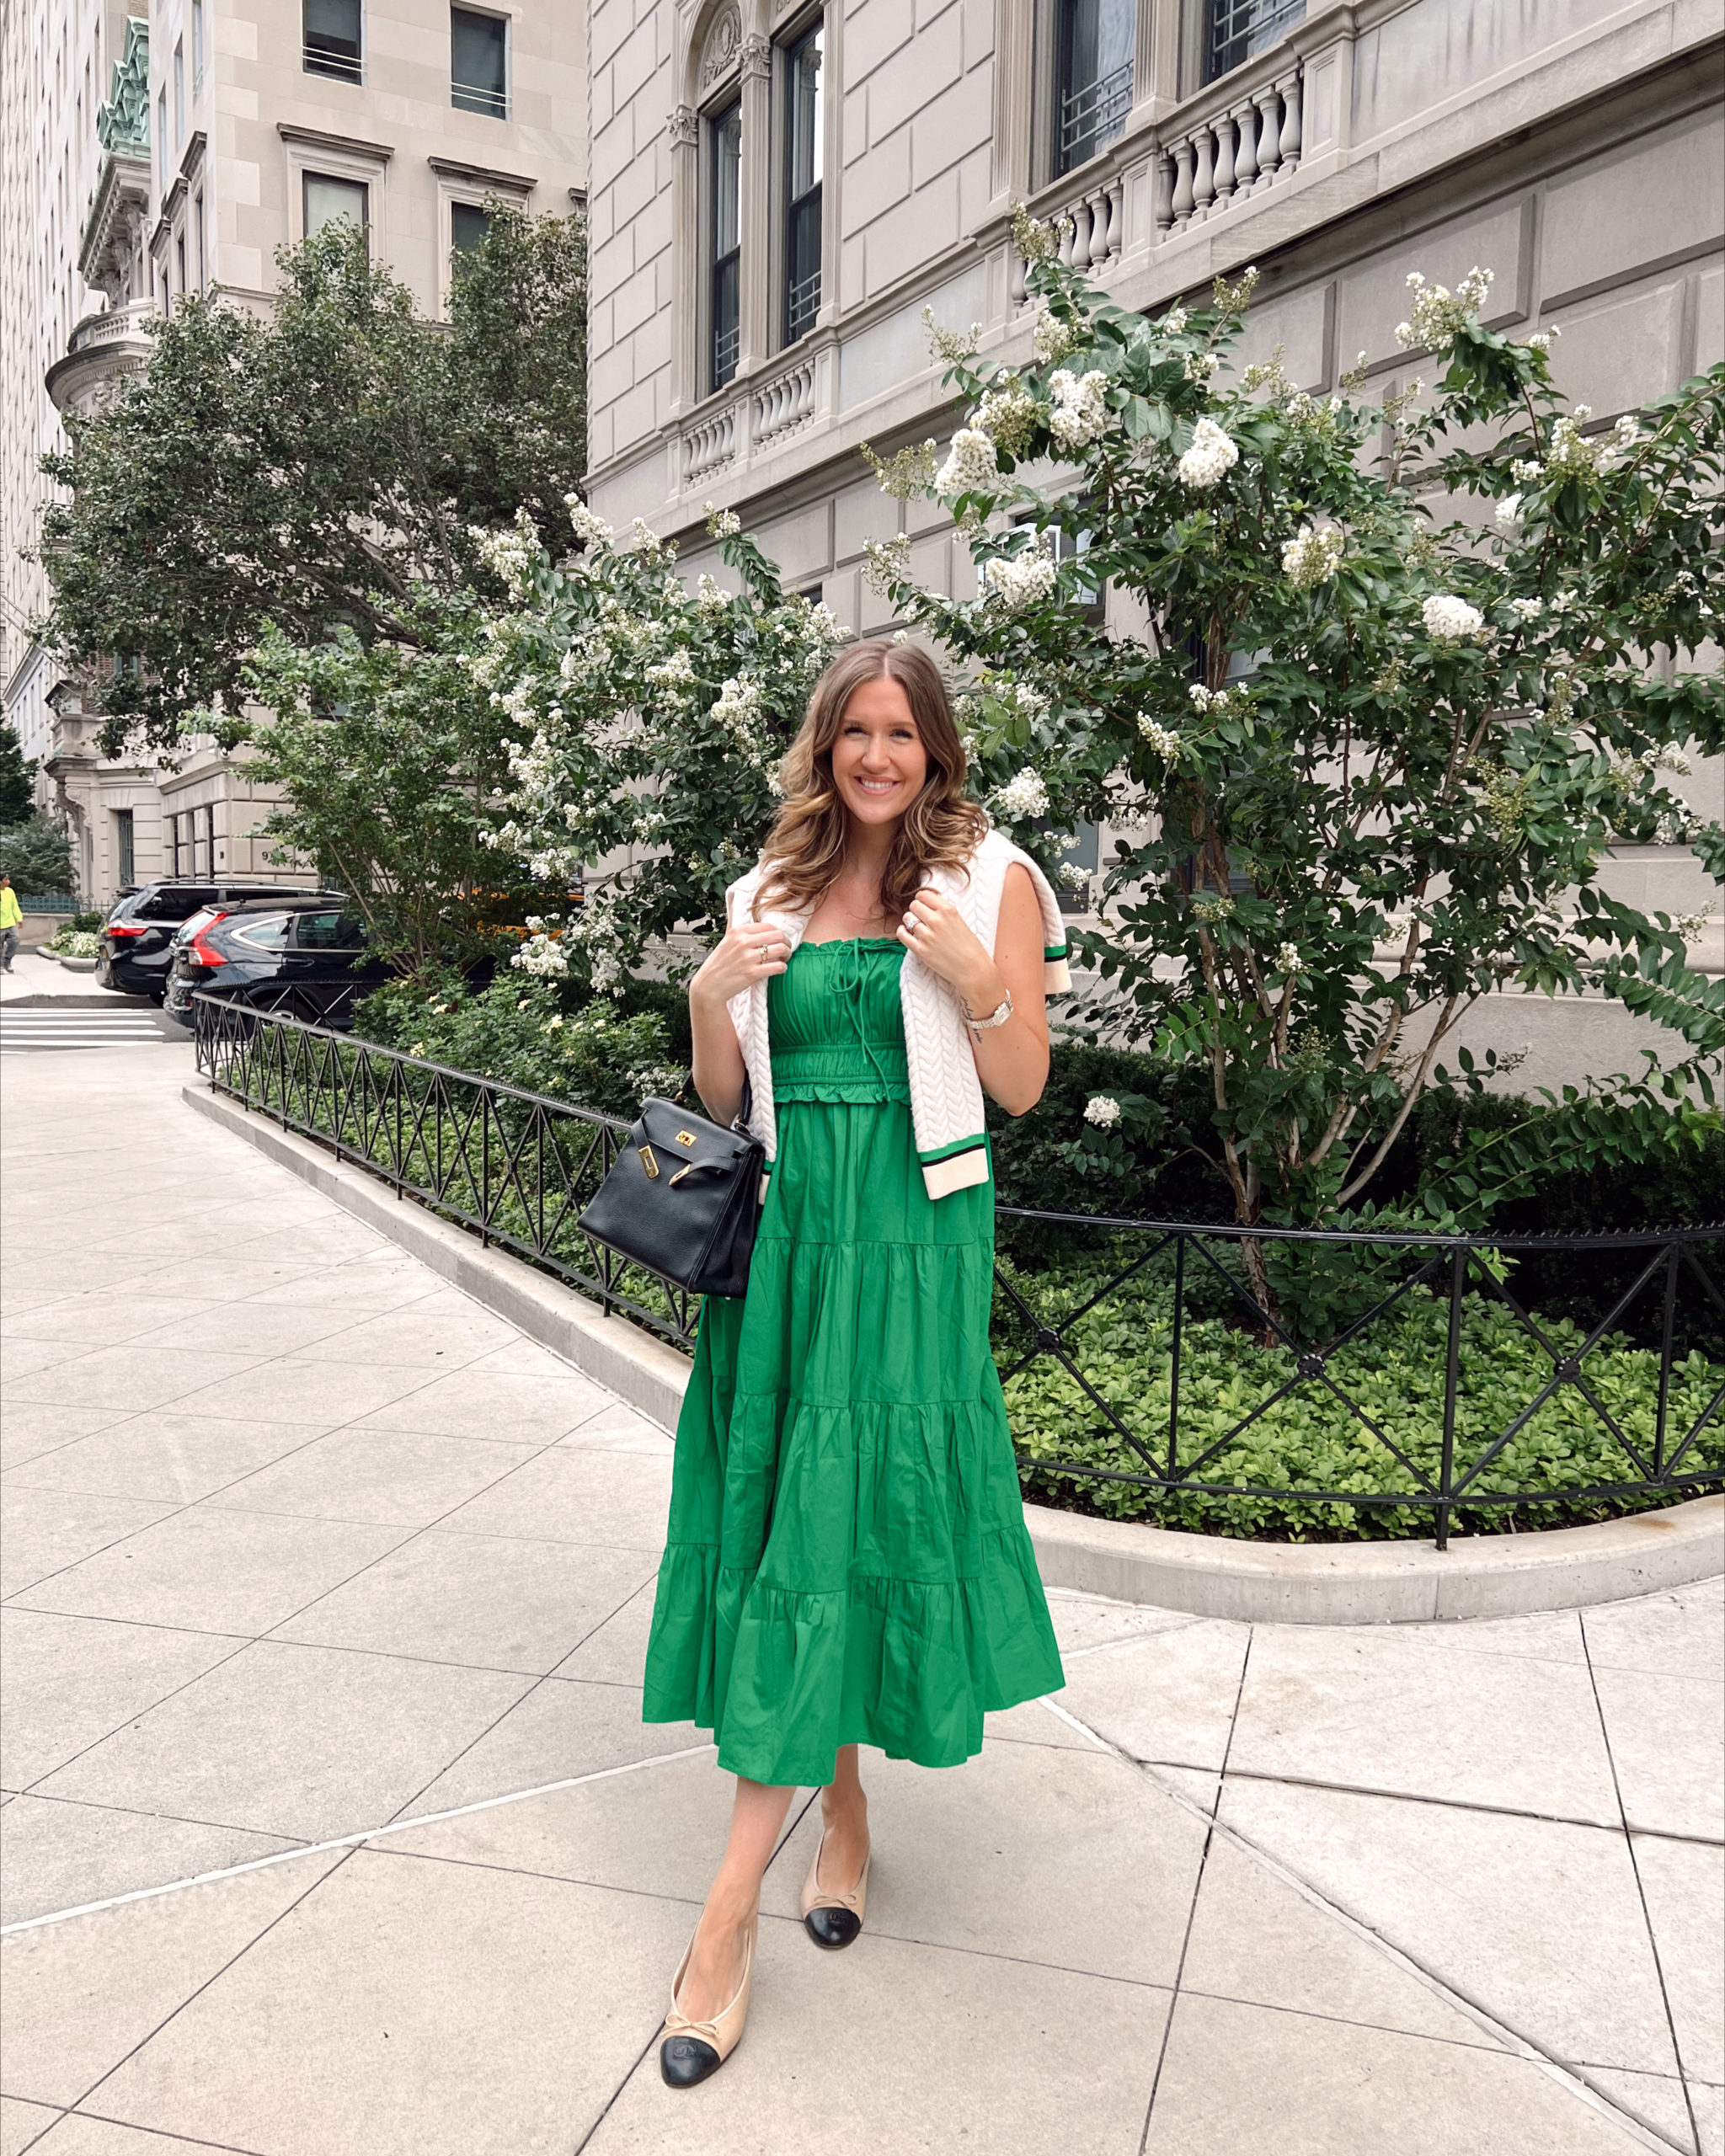 Anna wearing a green dress and an ivory cardigan thrown over her neck on the sidewalks of New York City.